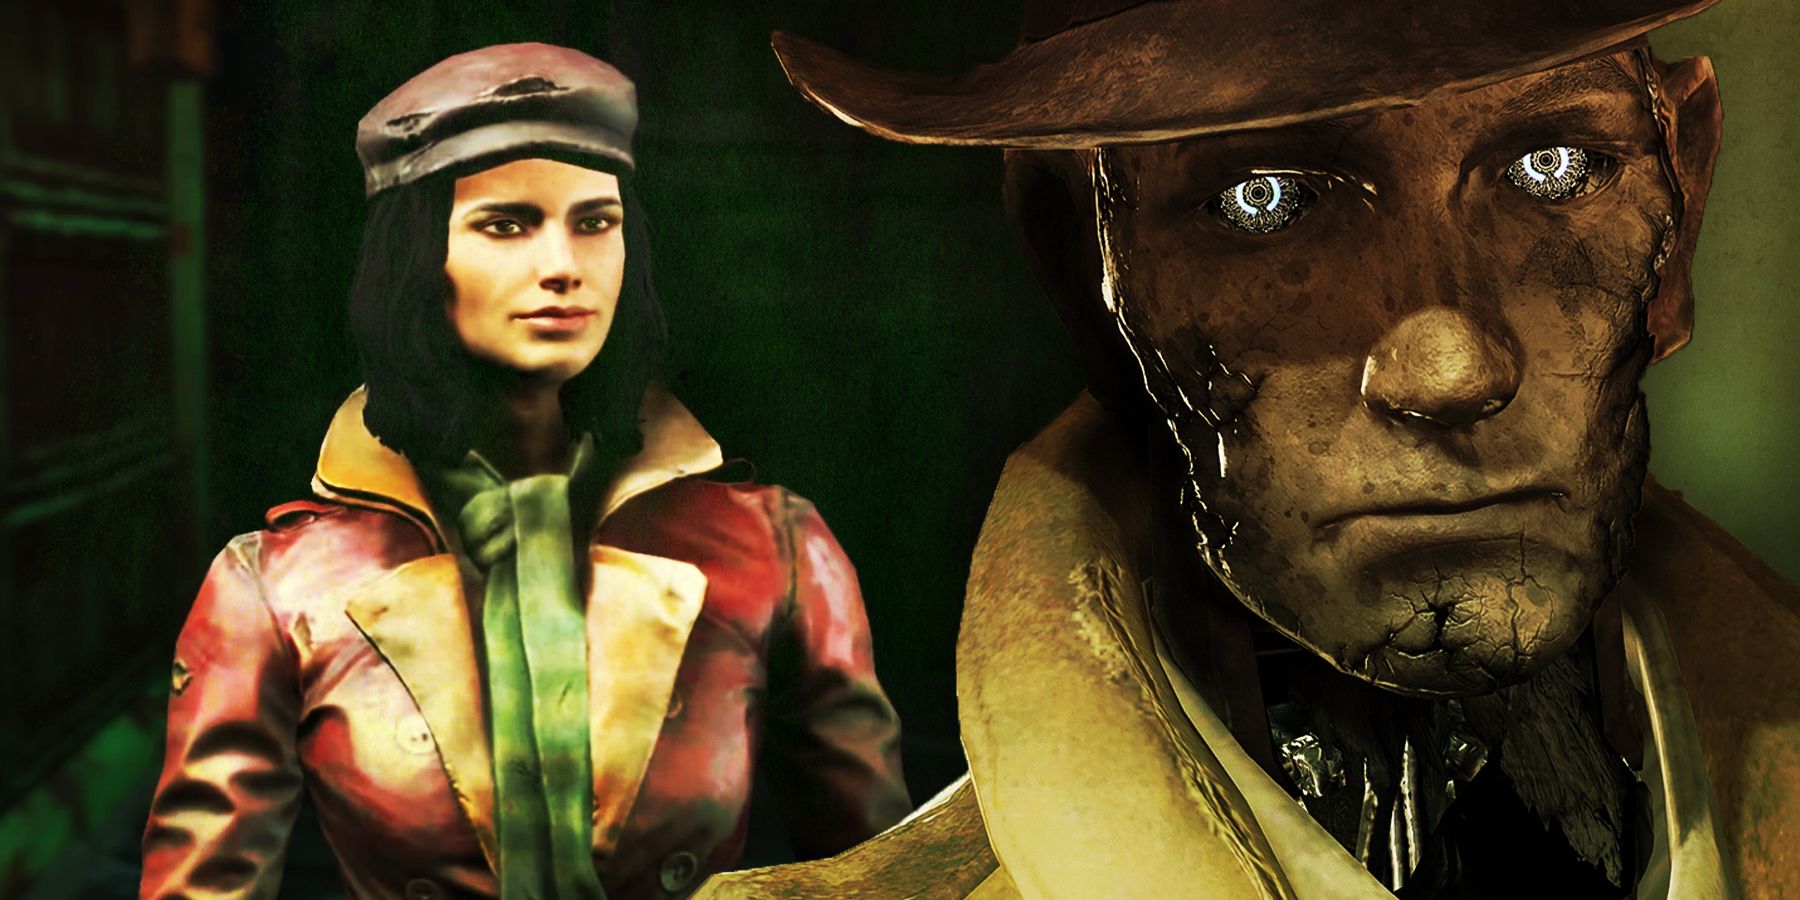 Who are the top 5 companions from Fallout 3, New Vegas and Fallout